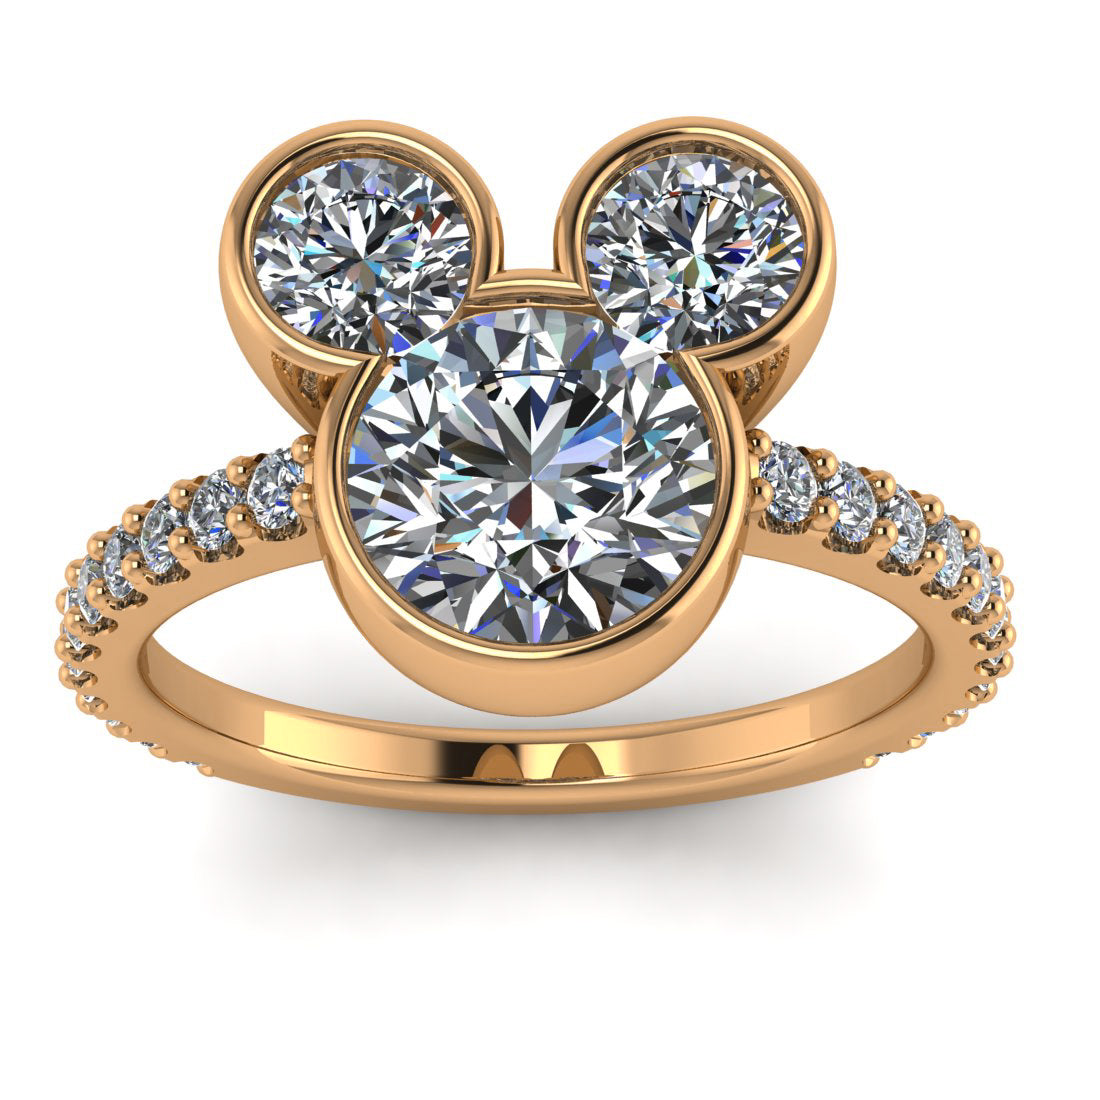 Magically Inspired Mouse Ears Engagement Ring - The Mouse